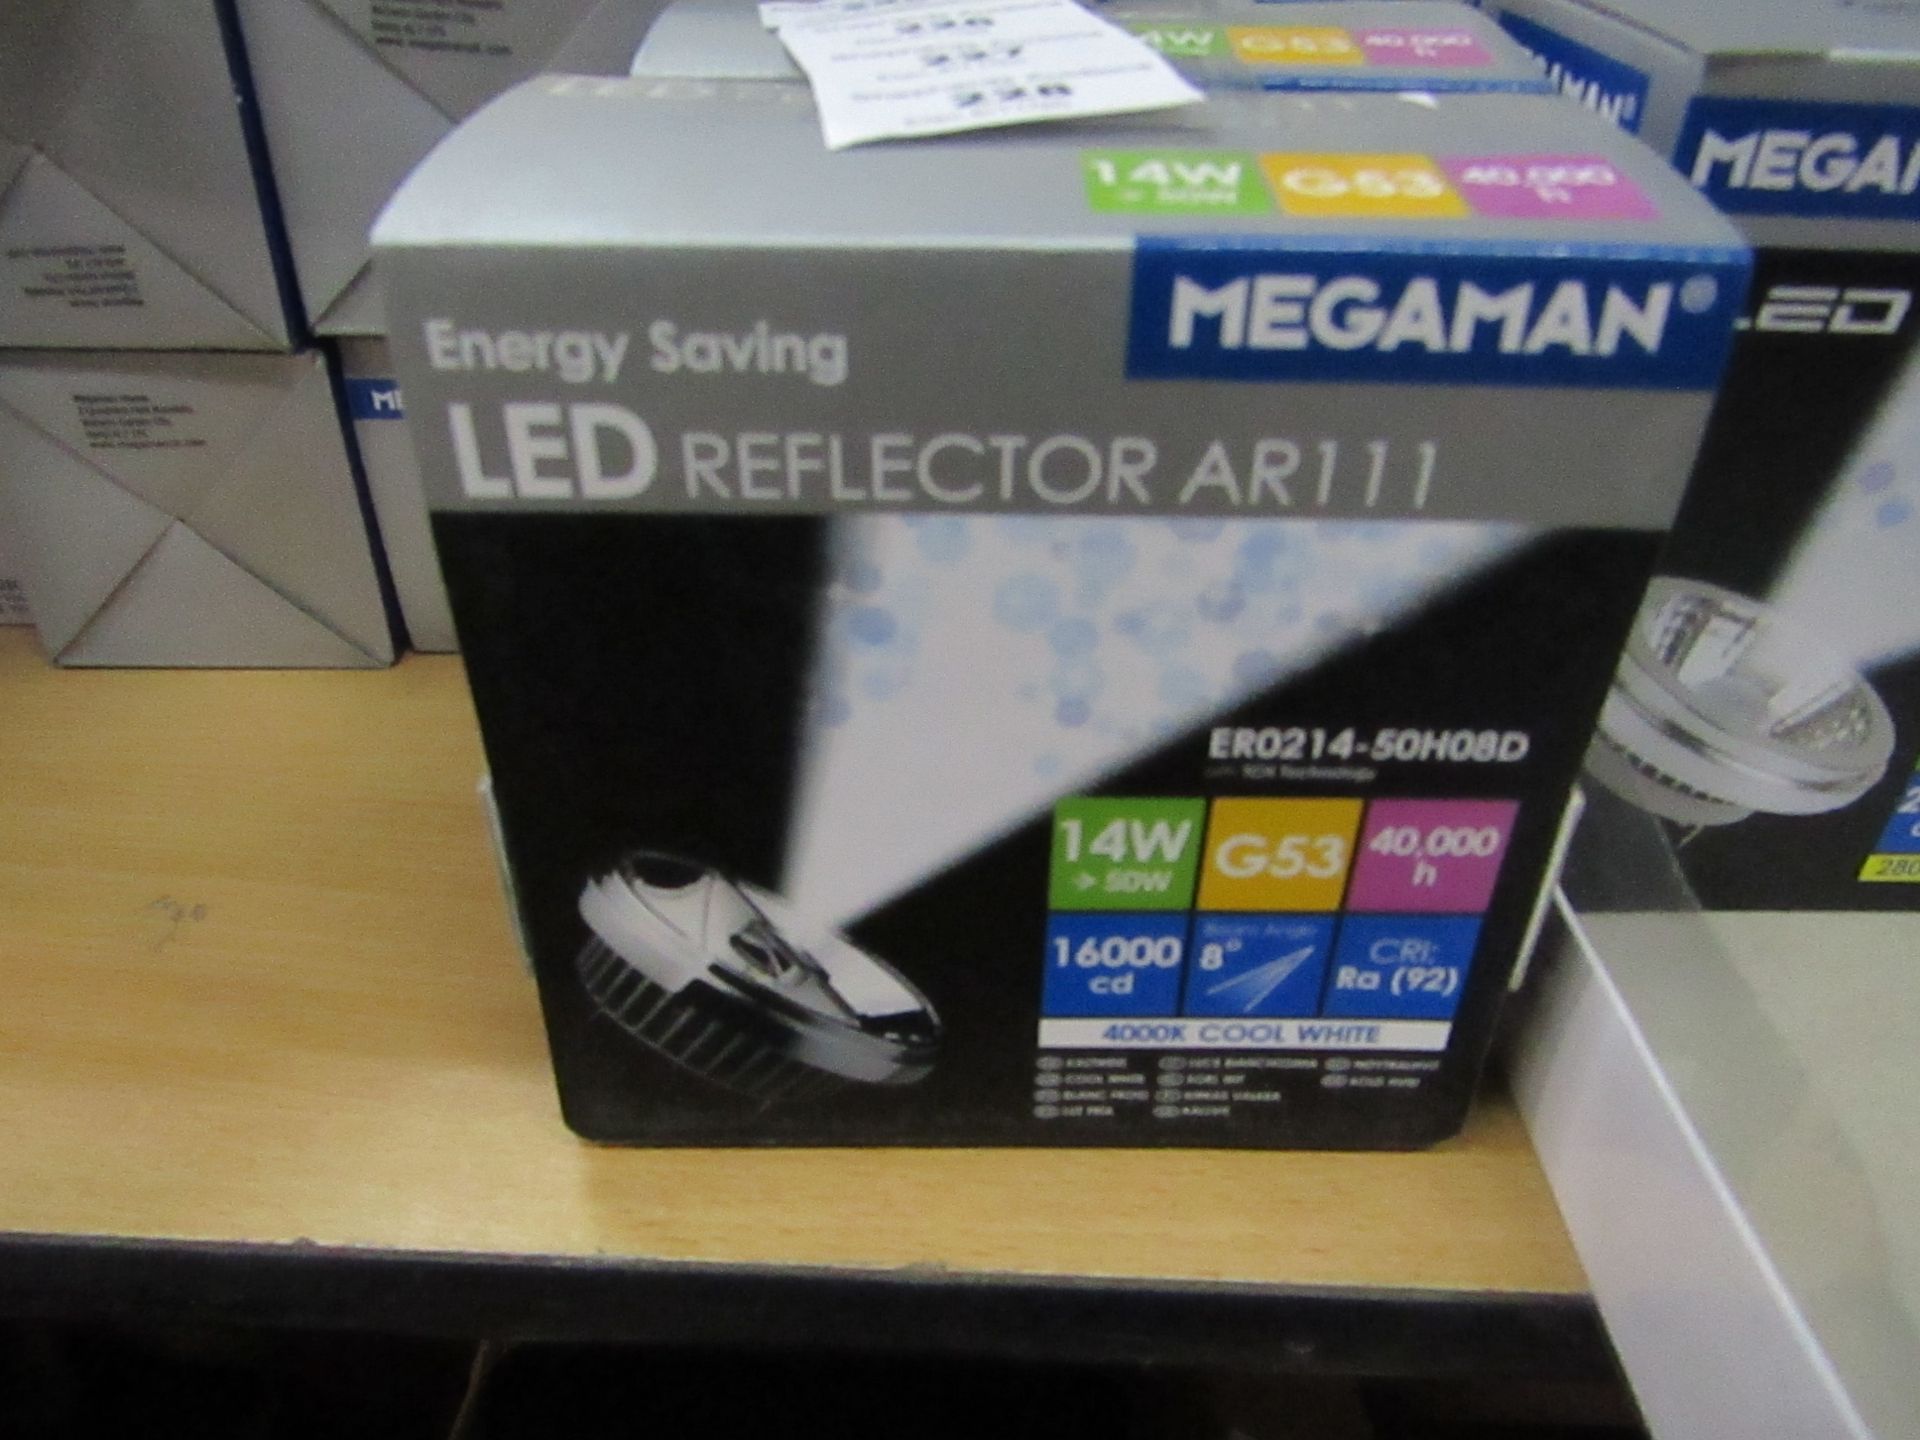 Megaman LED reflectorlight, new and boxed. G53 / 40,000Hrs / 14w